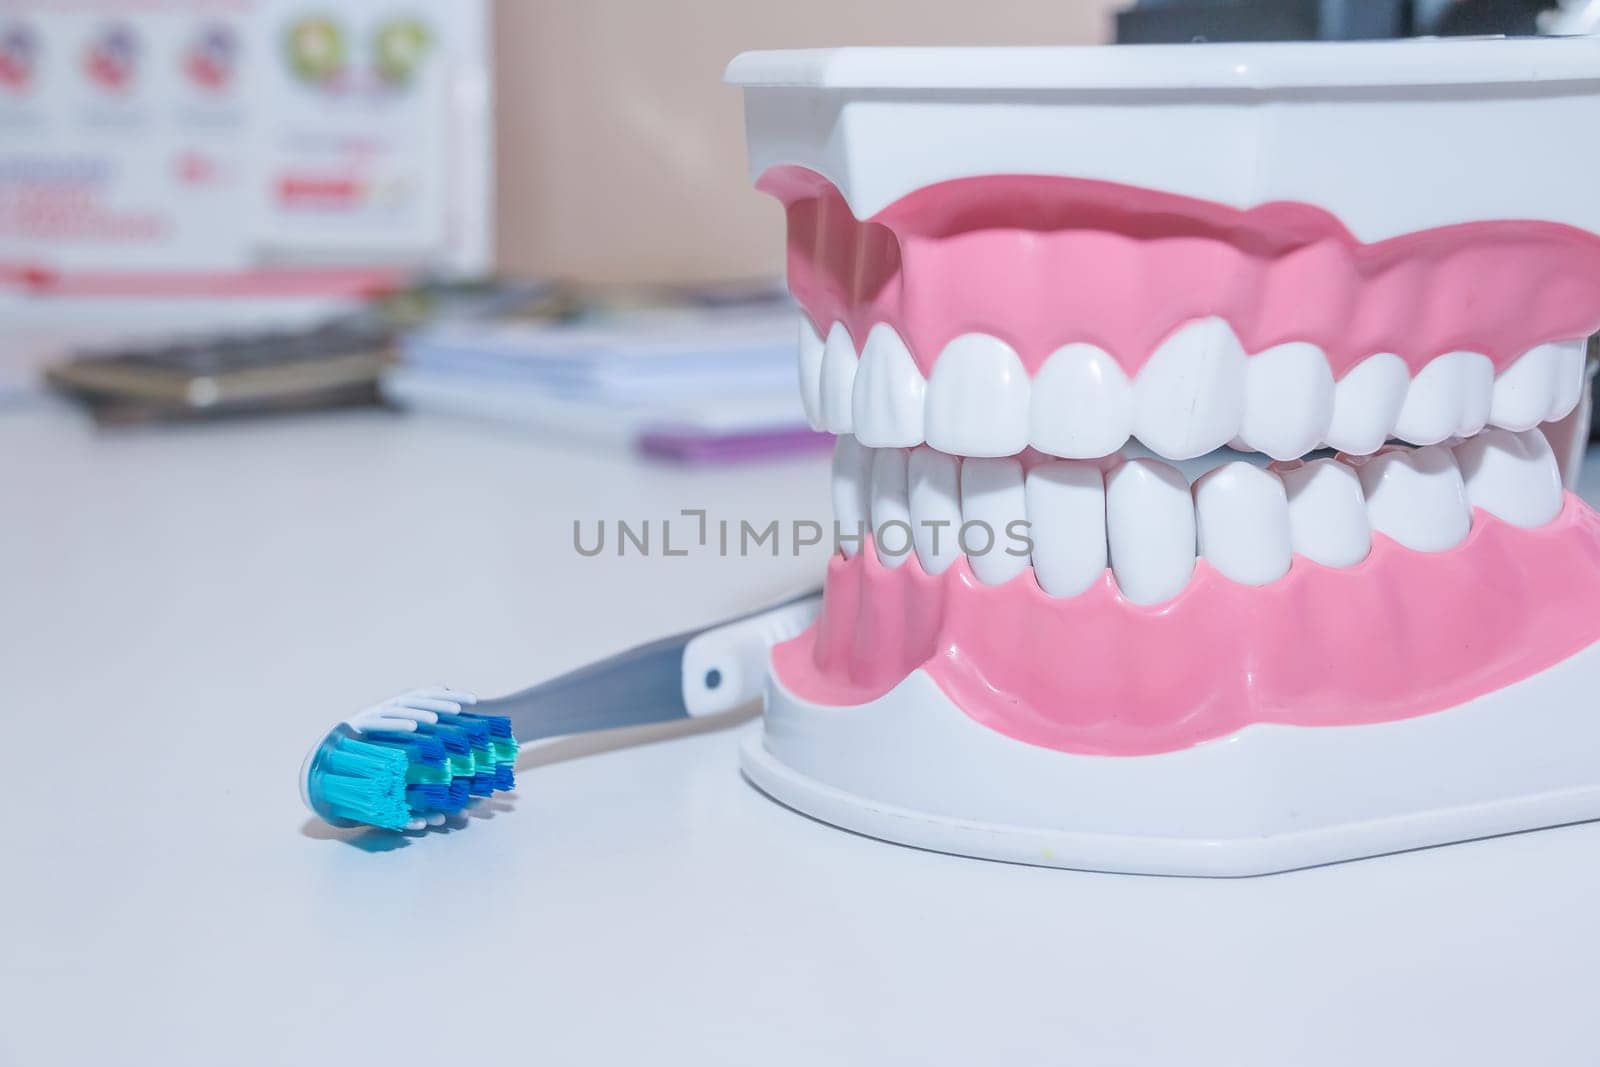 teeth model and dental tool on white background.Healthy care concept. various types of toothbrushes. beautiful smile concept. by YuliaYaspe1979